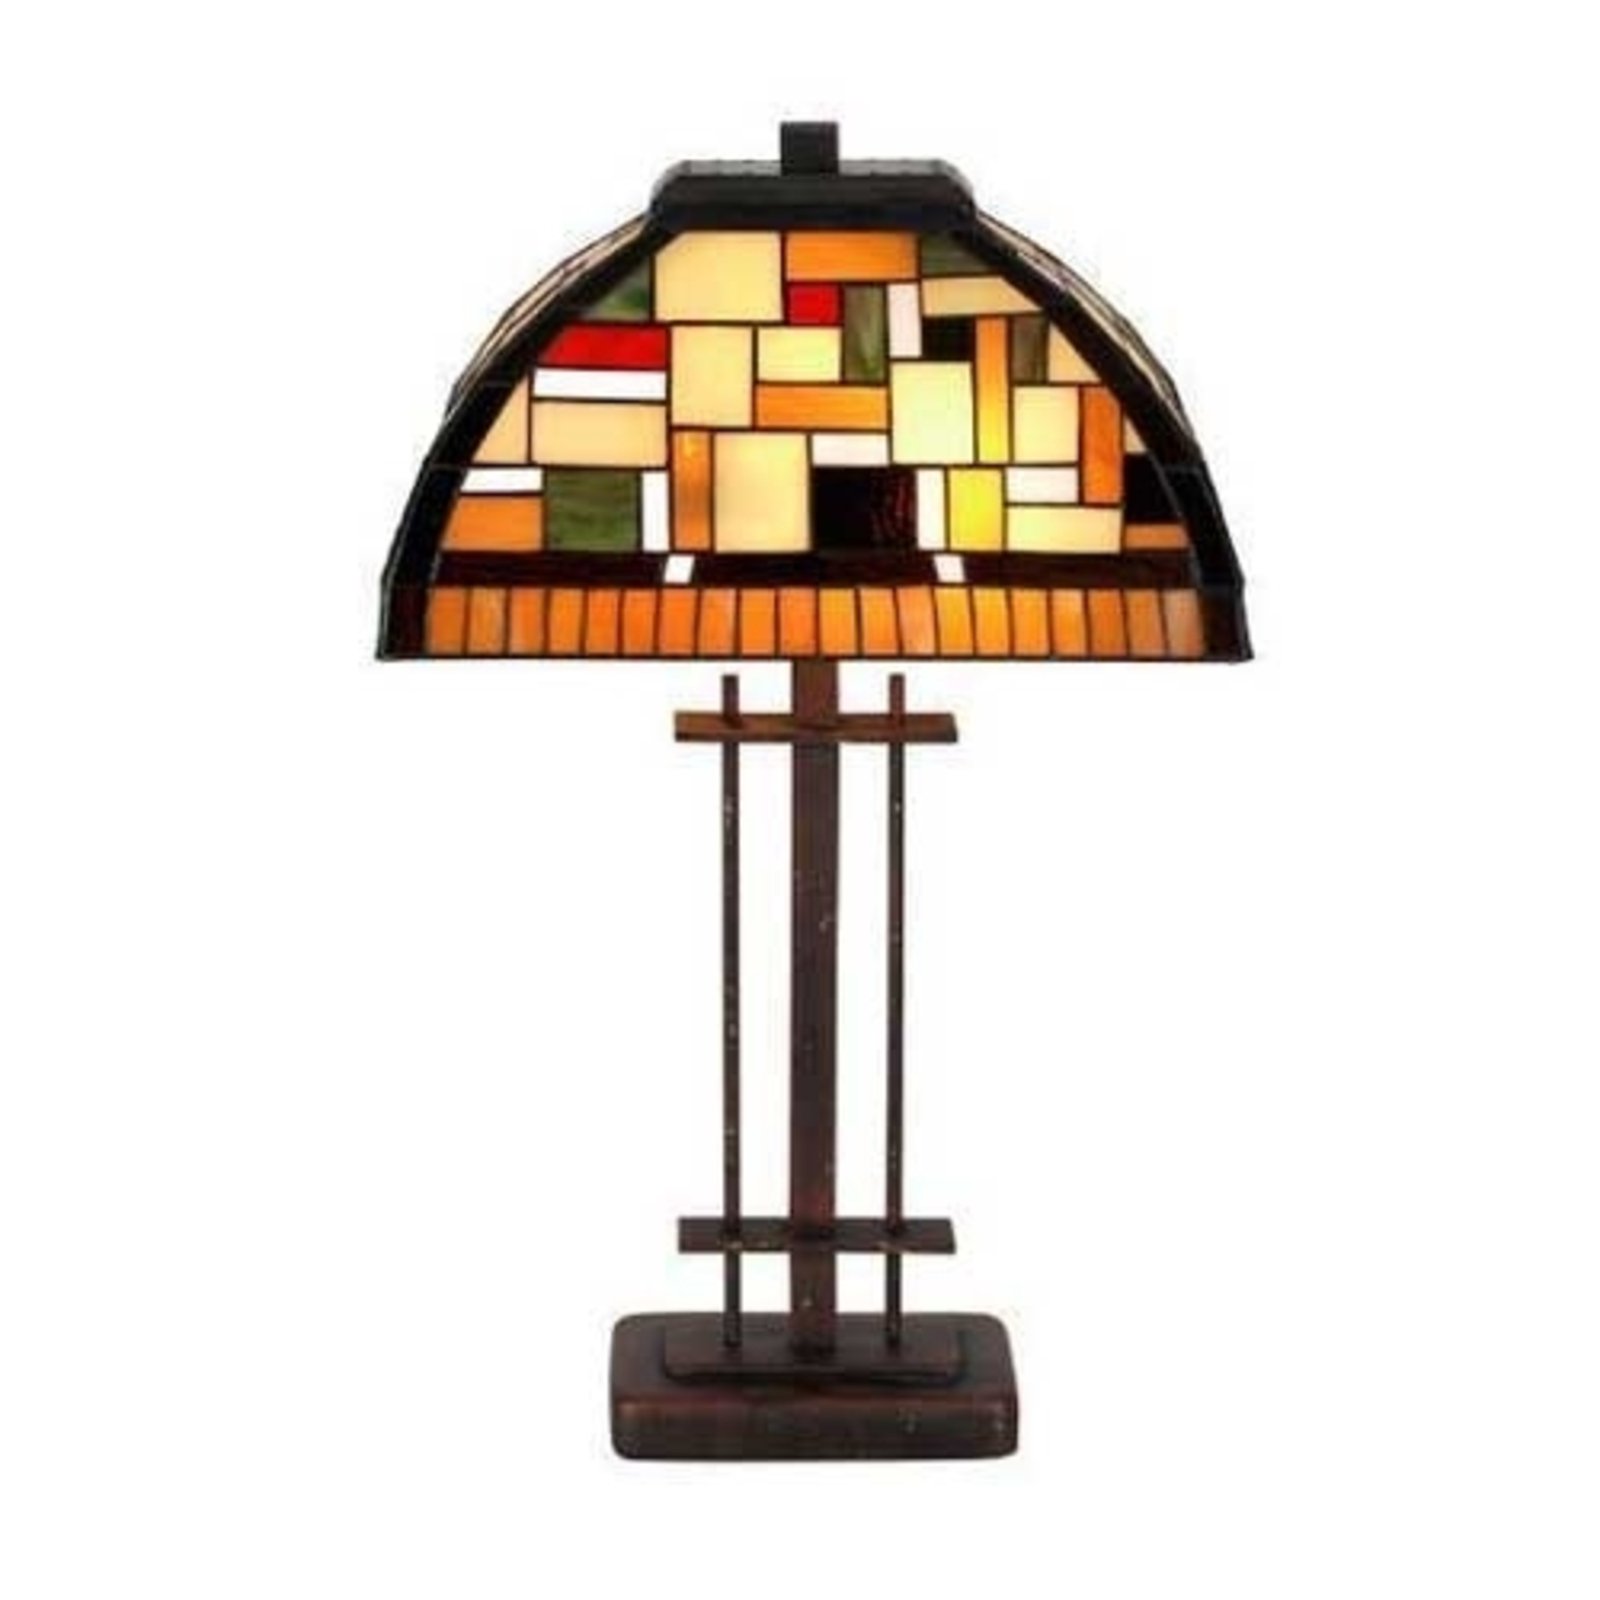 MOSAICA - Tiffany-style table lamp